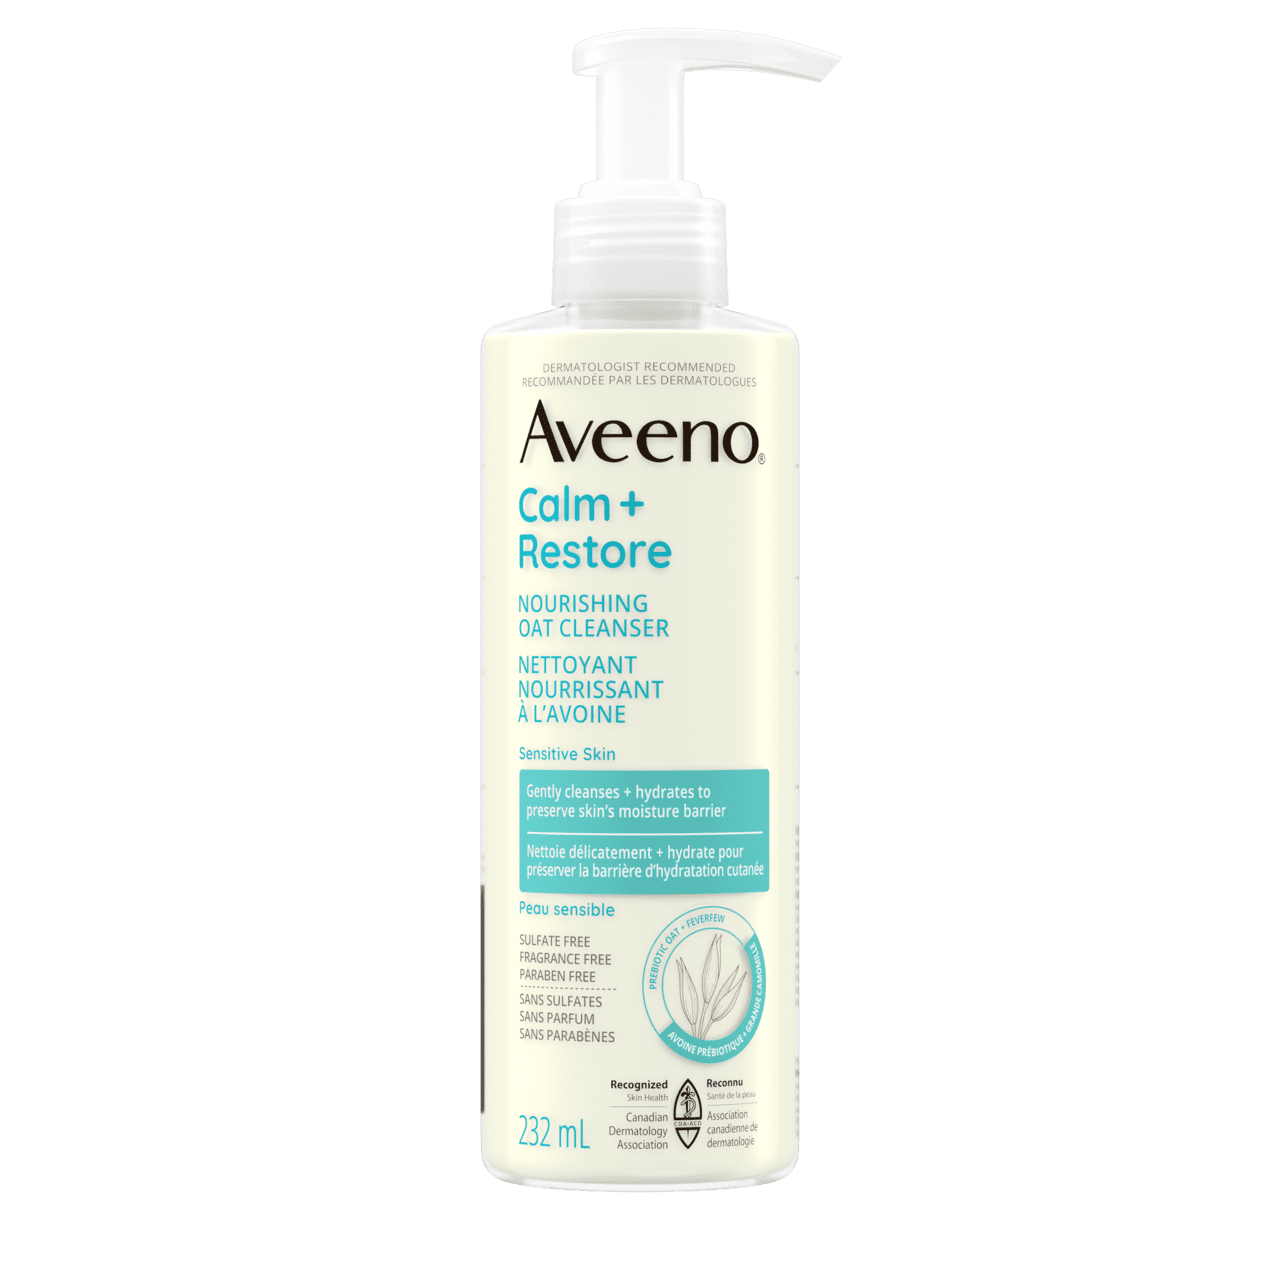 https://www.aveeno.ca/sites/aveeno_ca_2/files/product-images/ave_062600354792_ca_calm_restore_gel_cleanser_232ml_994495318_00000.png